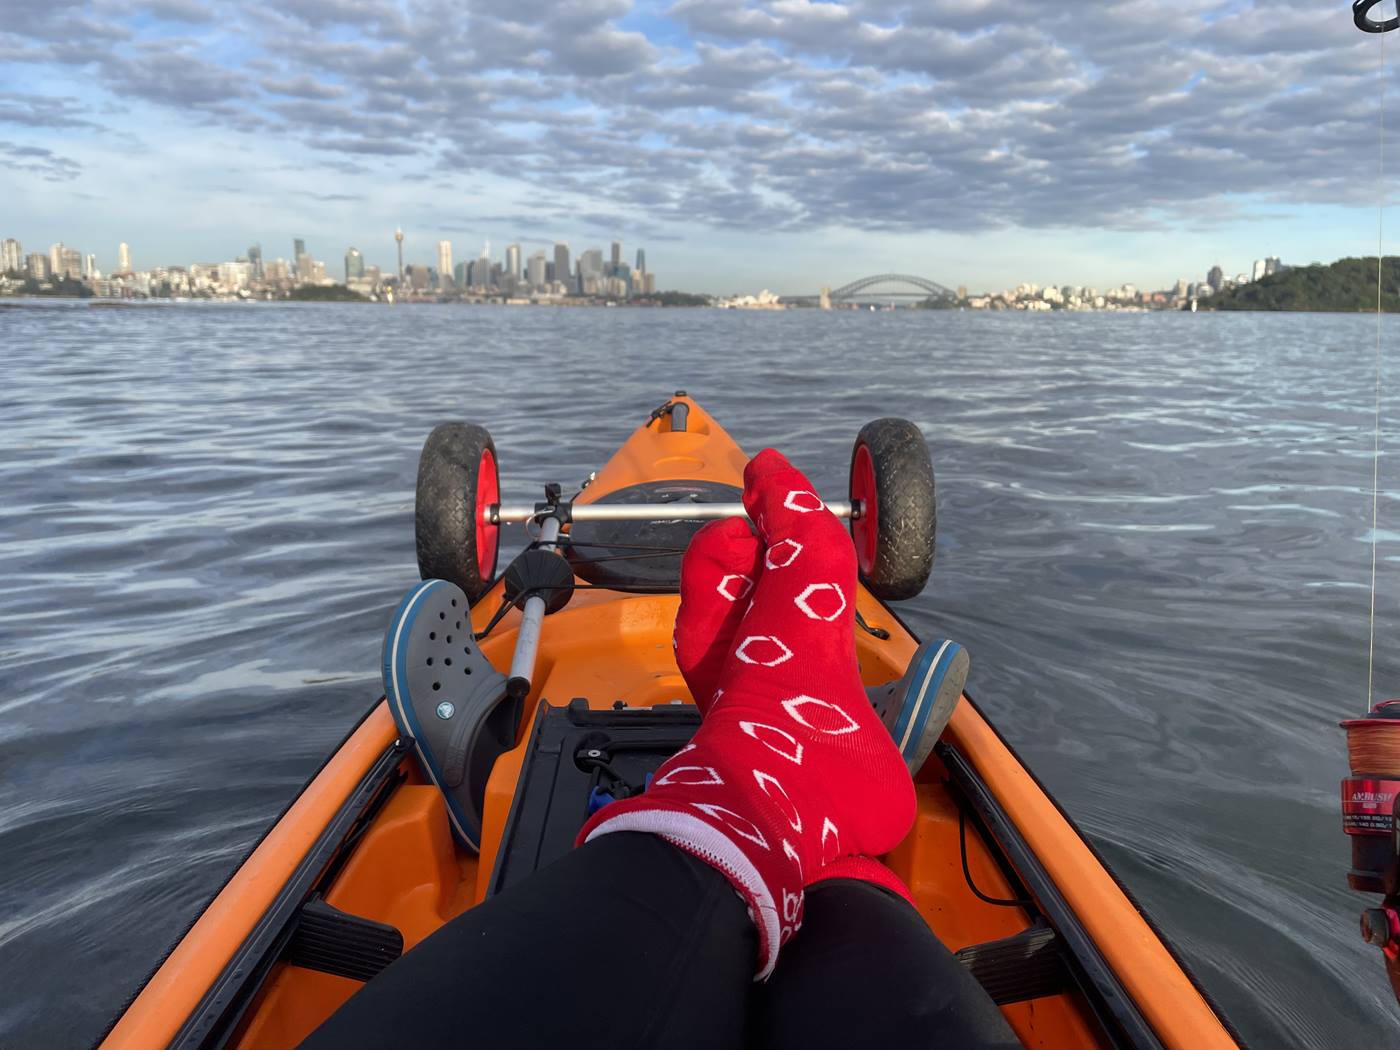 Swisslog colleague showing off his red socks in Sydney Harbour